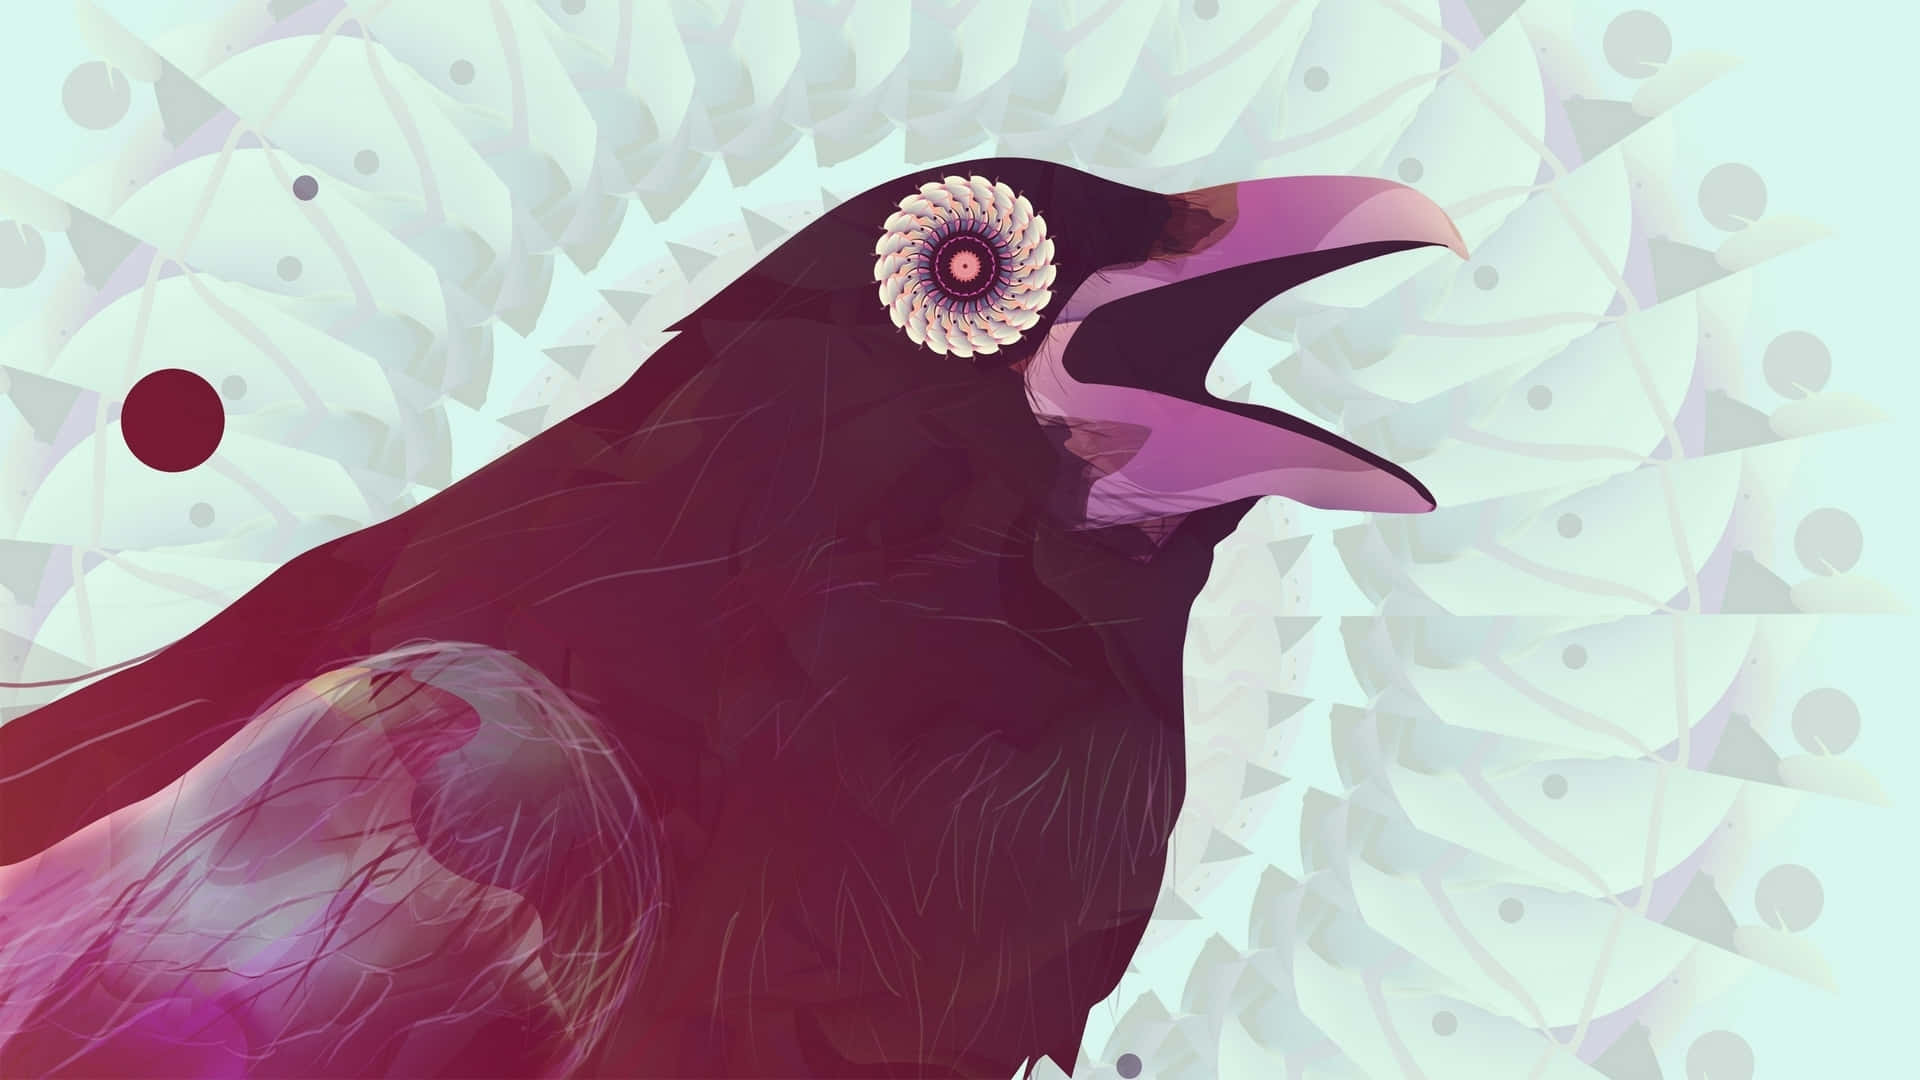 "The beauty of a raven's call evokes a sense of mystery and contemplation."